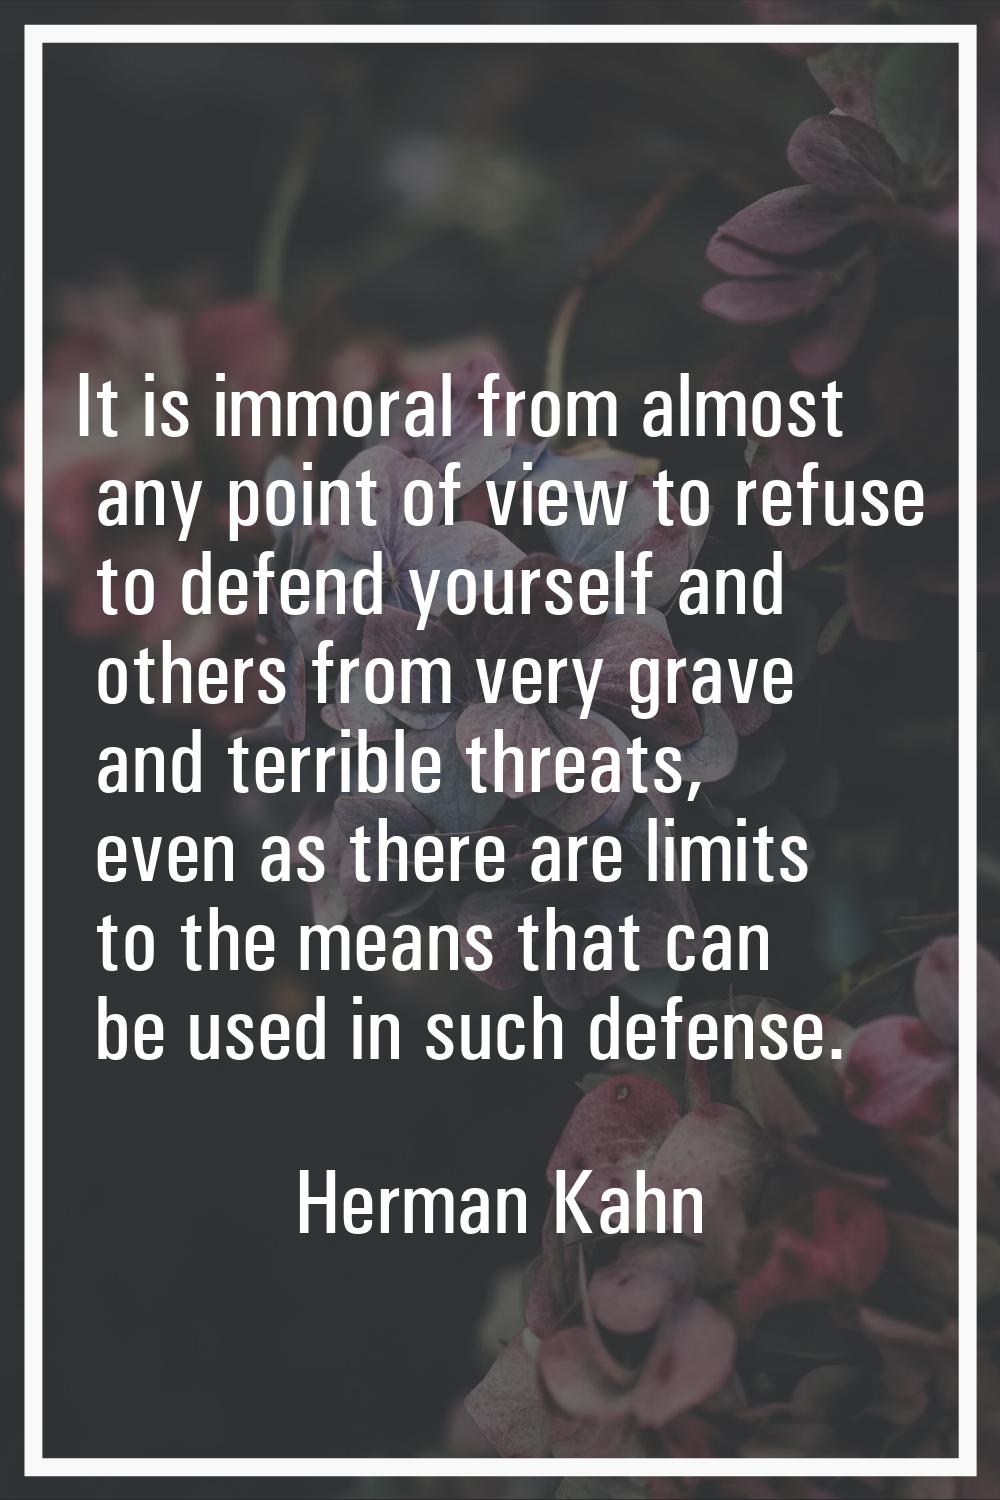 It is immoral from almost any point of view to refuse to defend yourself and others from very grave